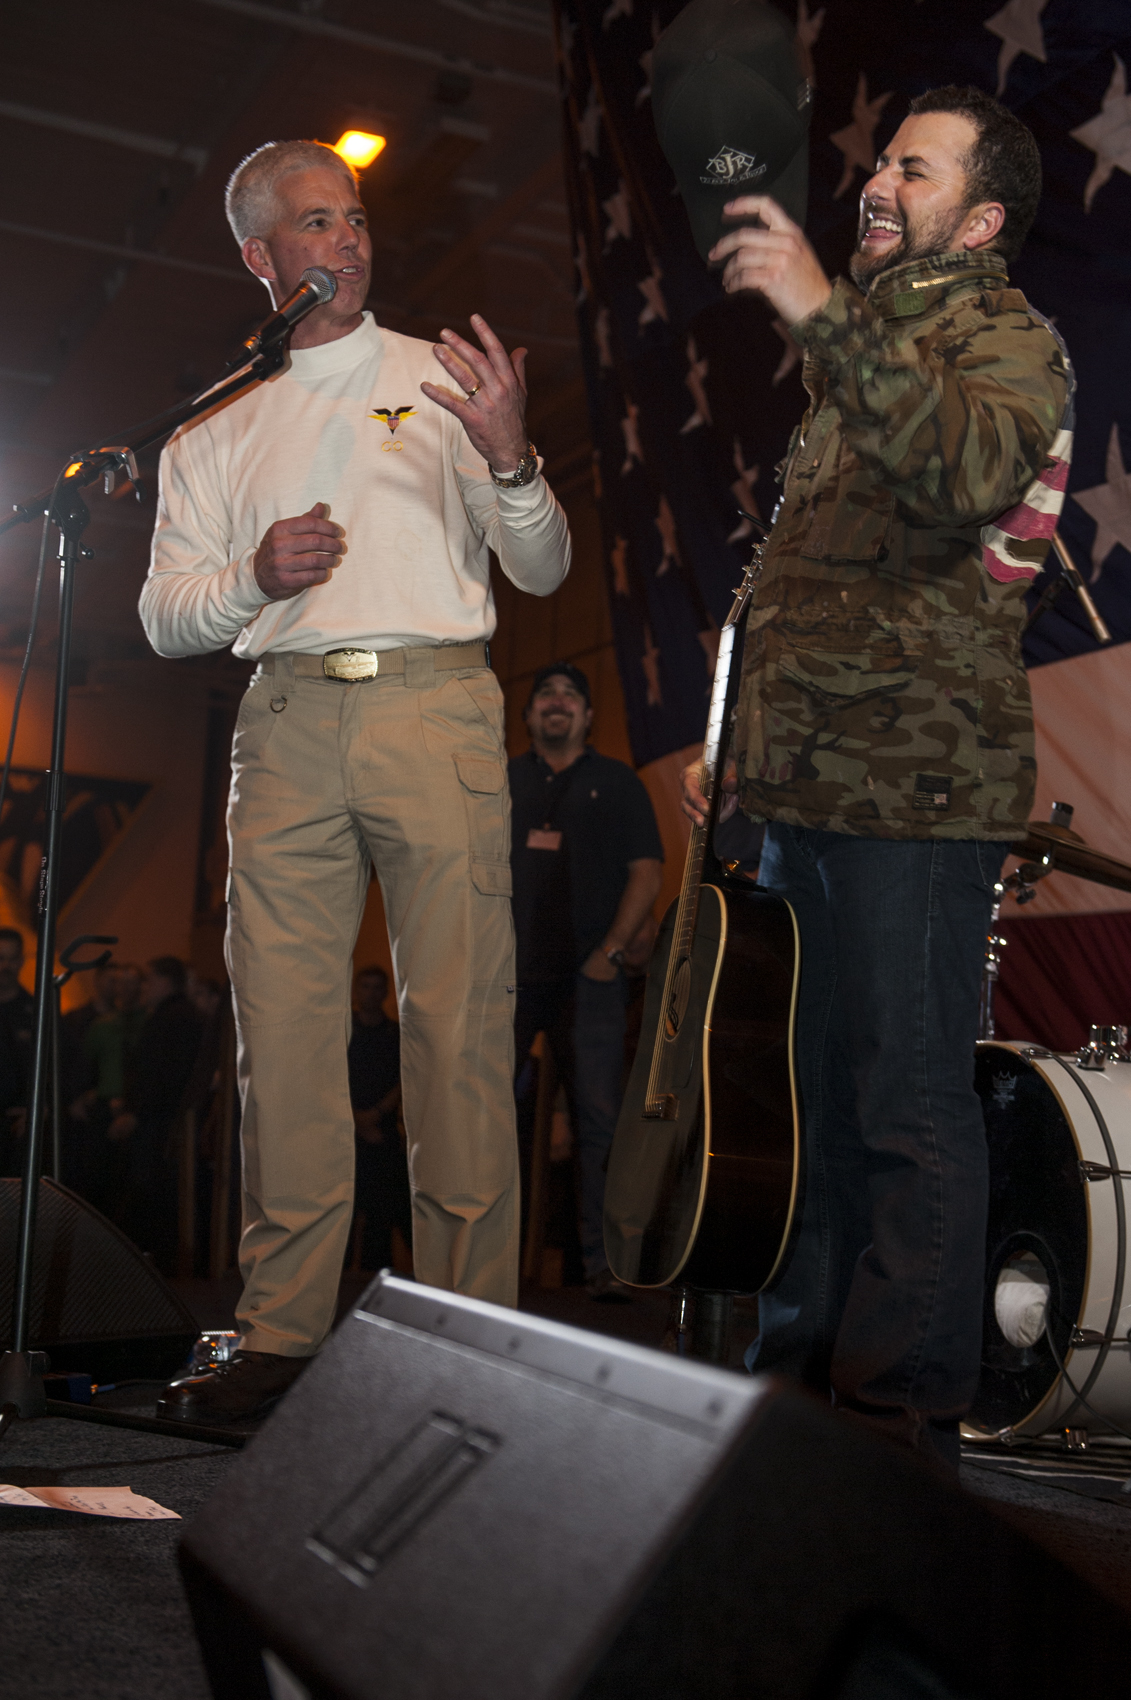 two guys are talking and singing on stage